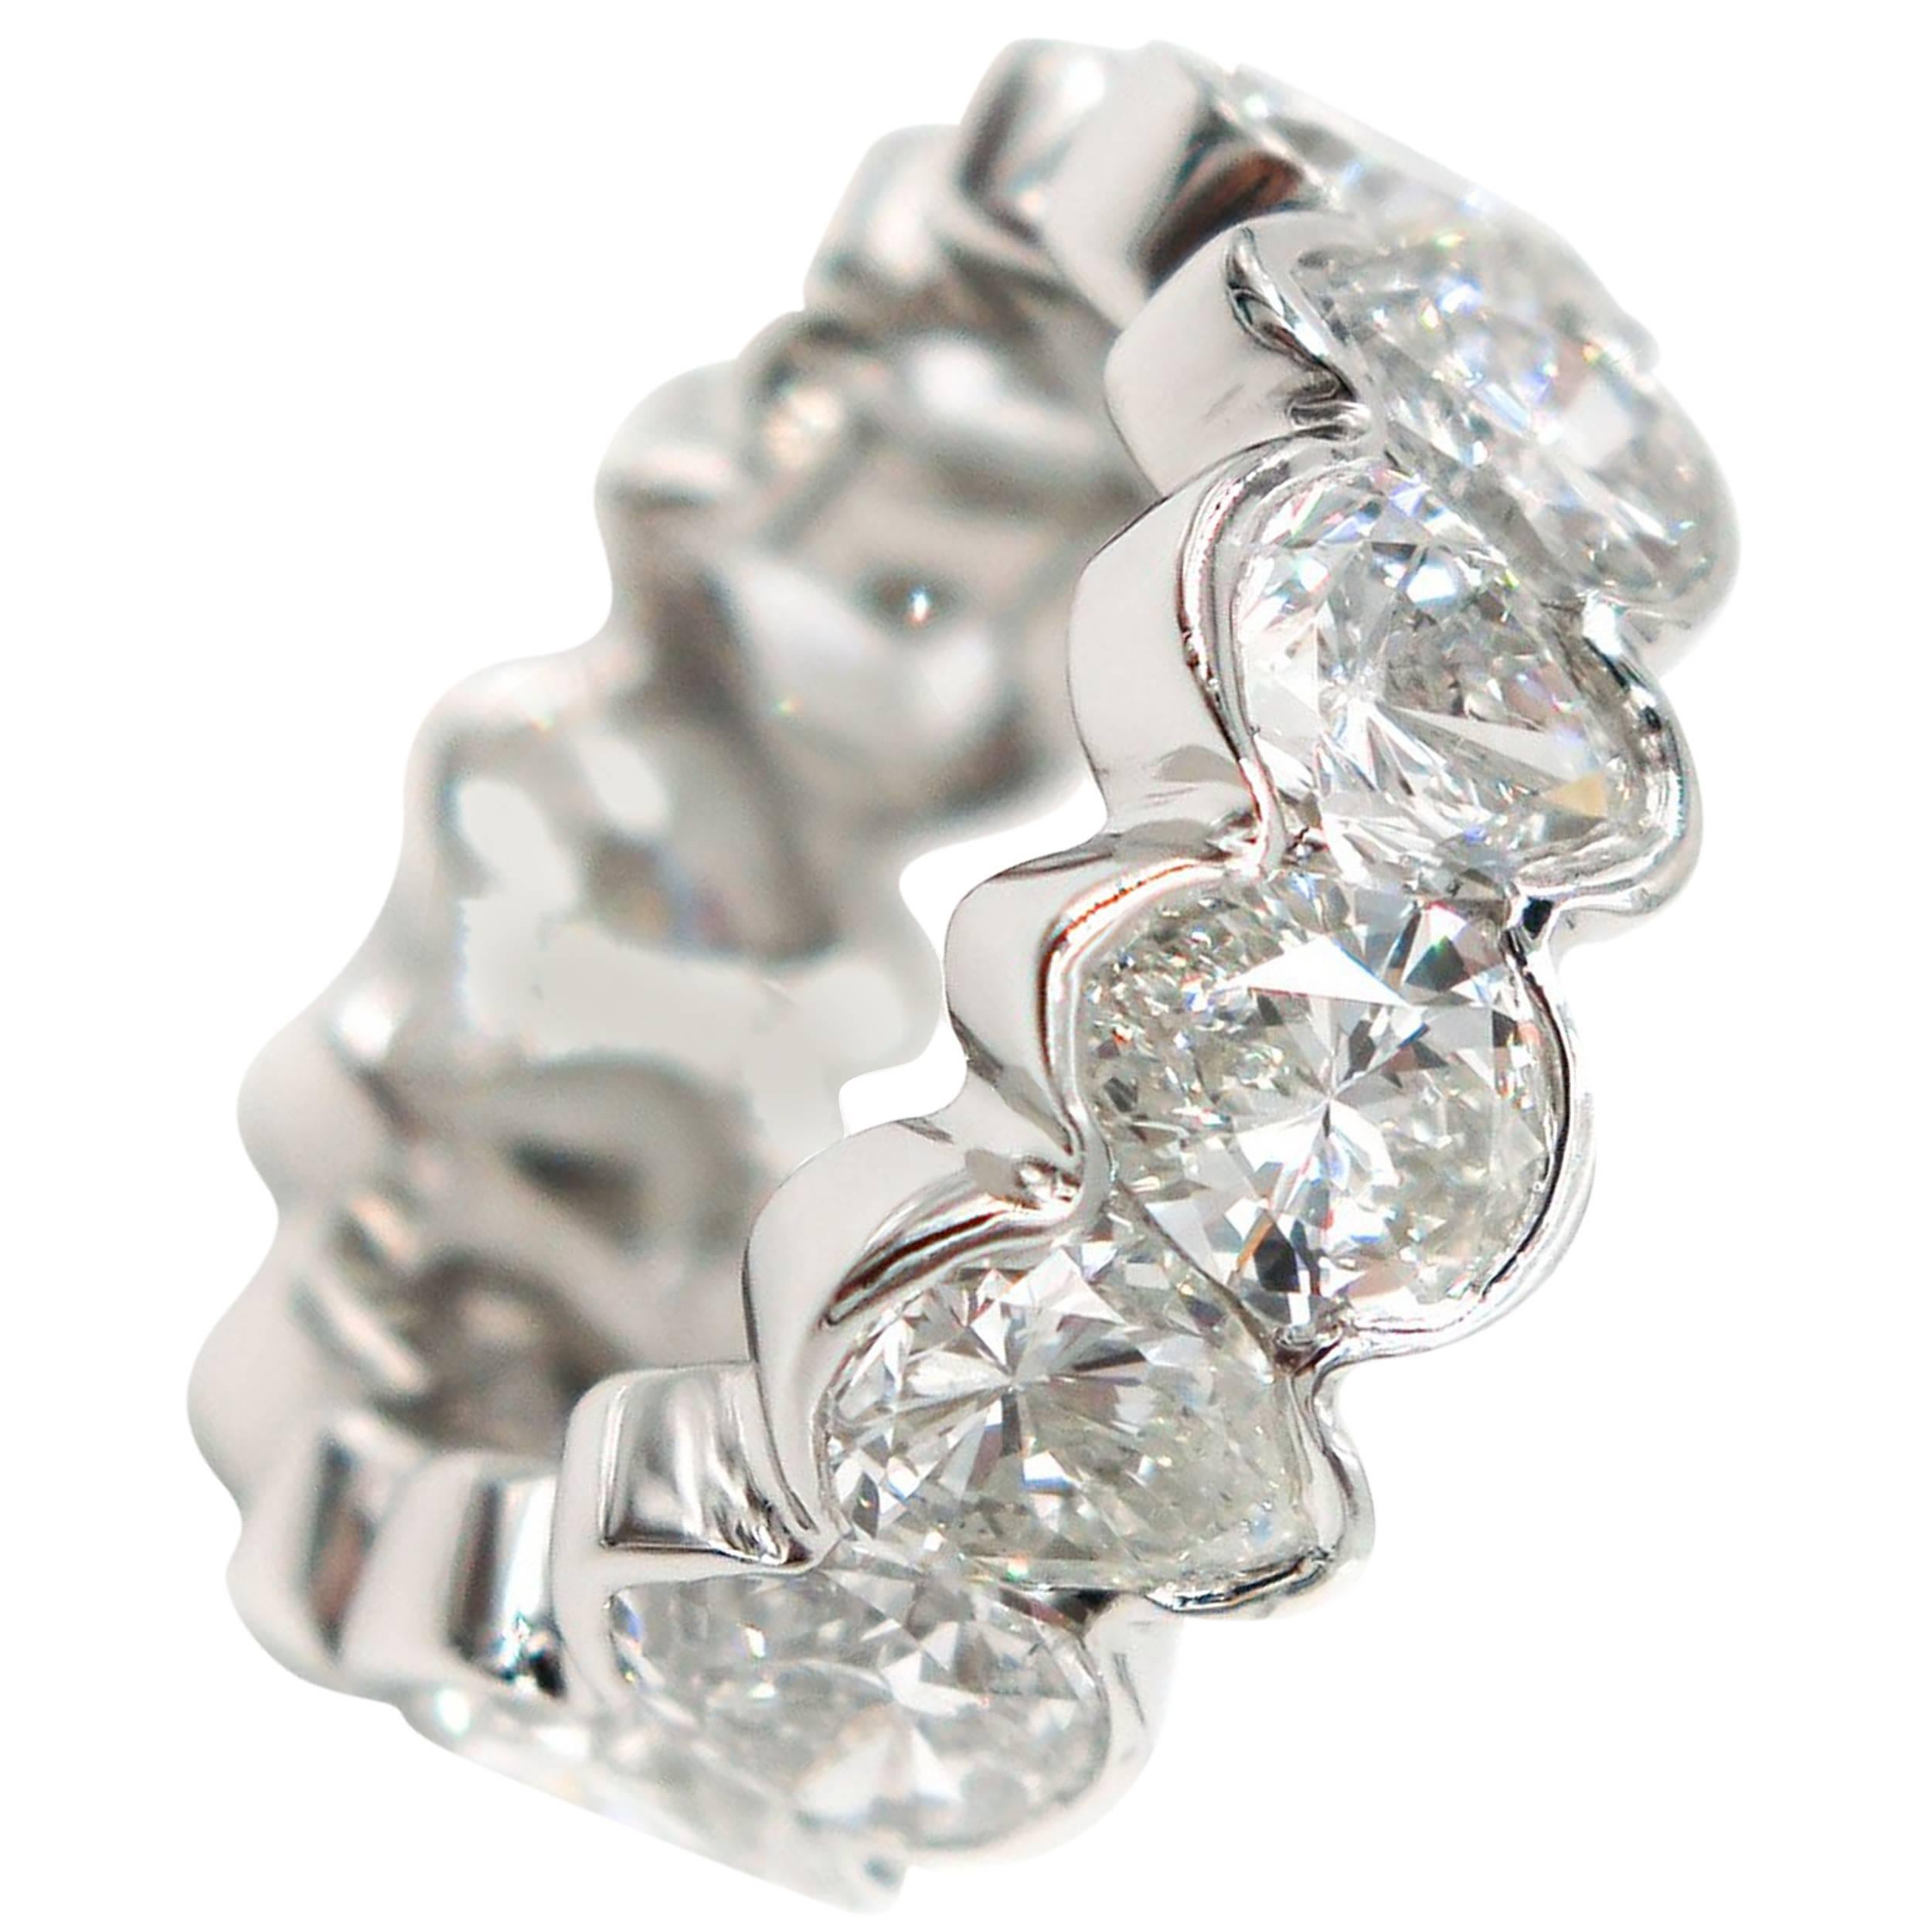 This beautiful diamond eternity band features 16 hand picked matching pear shaped diamonds weighing approximately 8.32 carats. G-H color and VS2/SI1 clarity.
This ring is handcrafted in platinum and provides a mosaic of light and color that twinkles